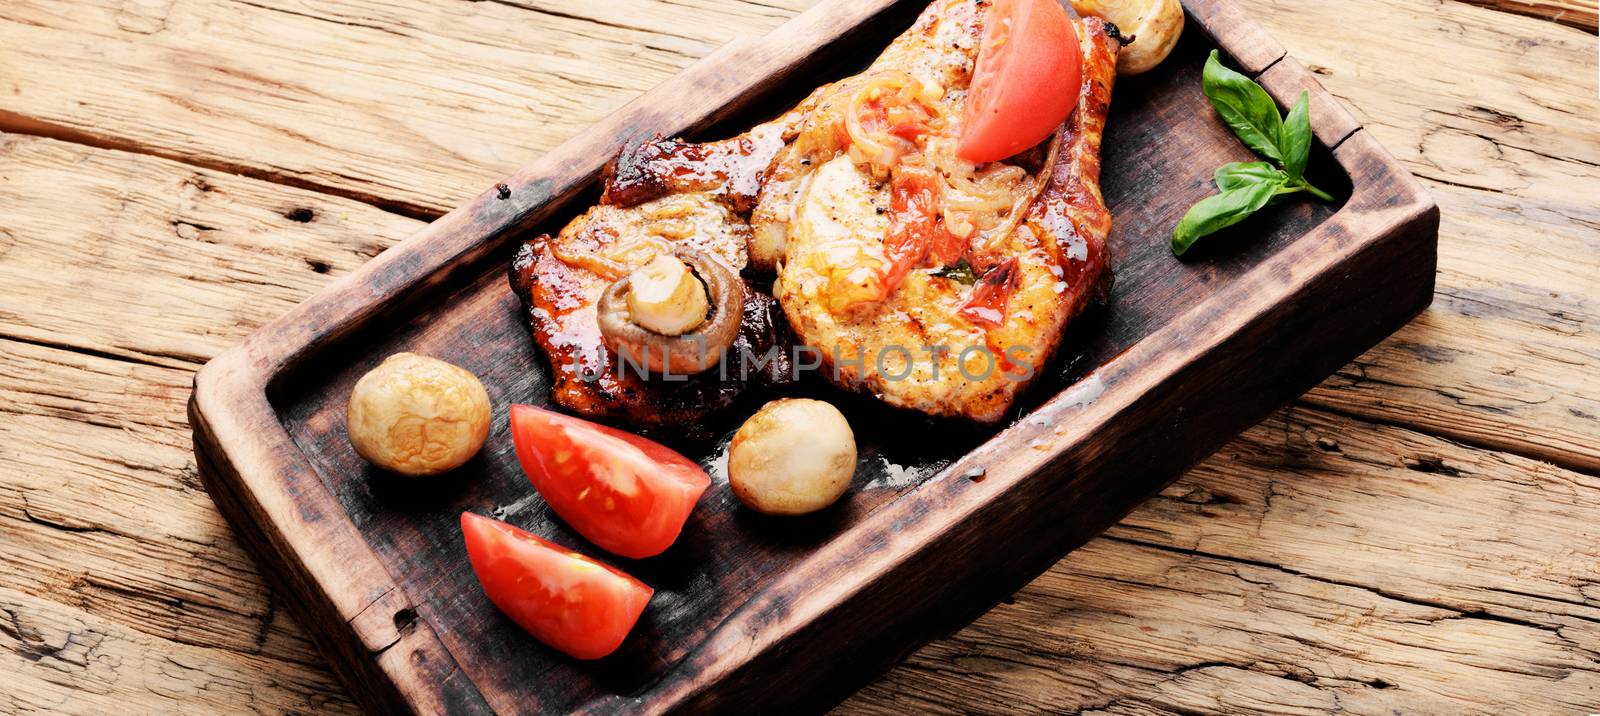 Grilled meat steak,tomato, herbs and spices on cutting board